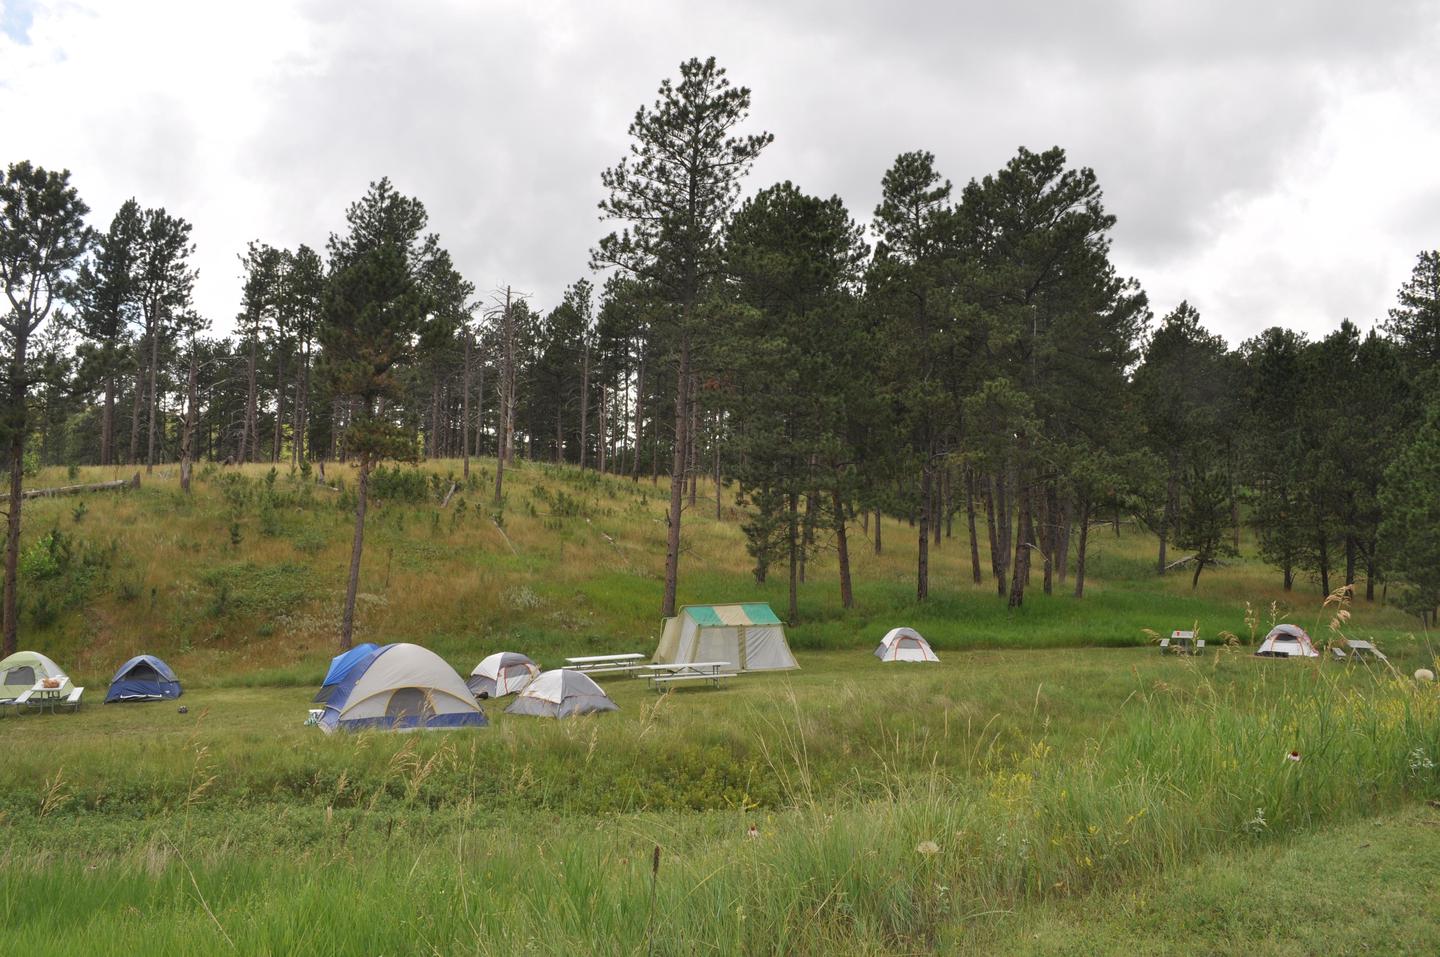 Elk Mountain Campground Group CampsiteThere are two group campsites available to reserve at Elk Mountain Campground.